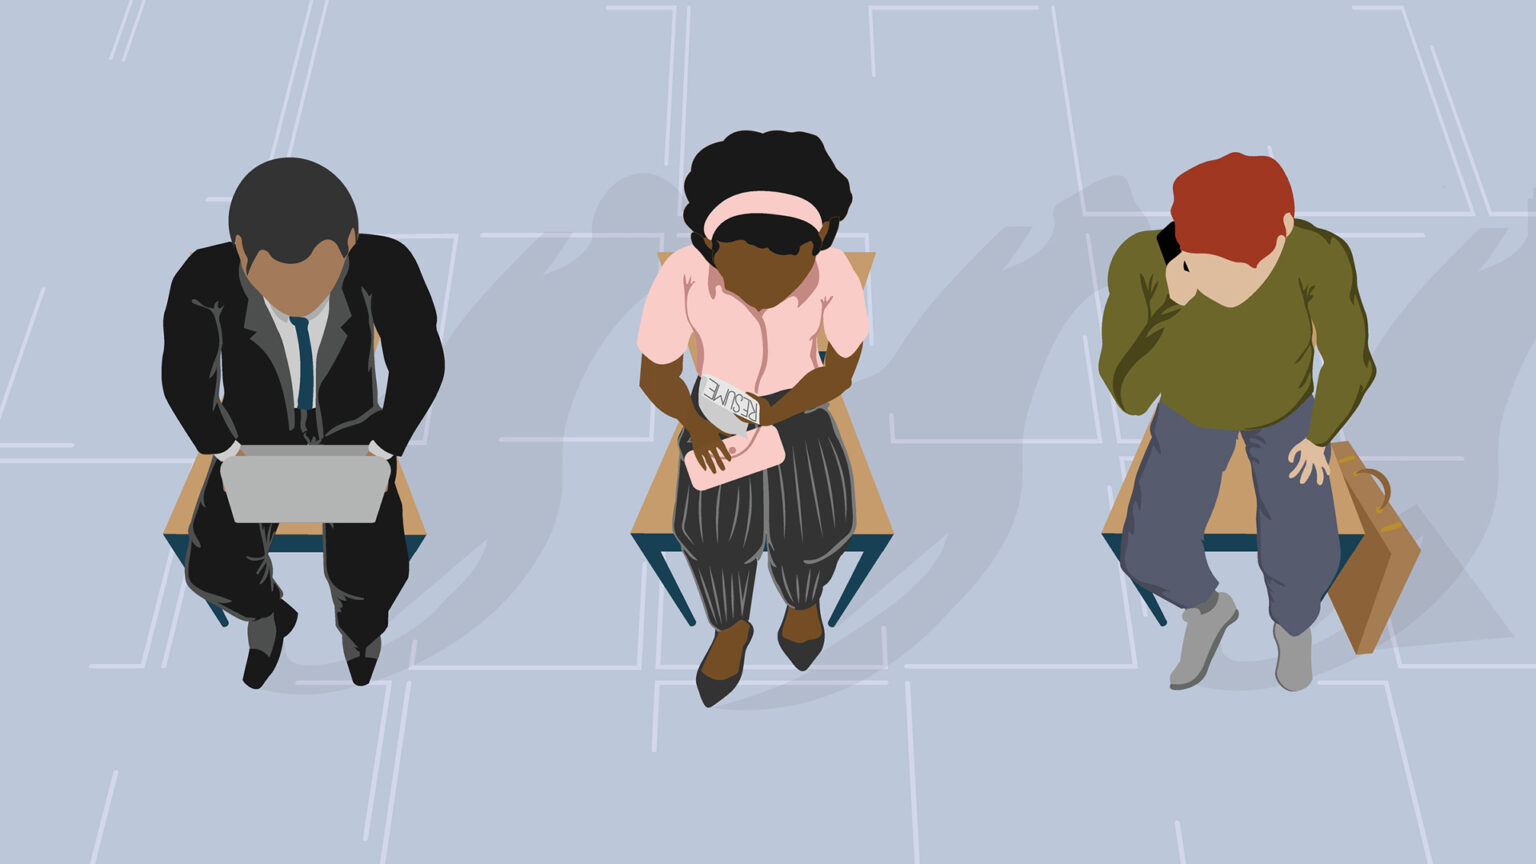 An illustration shows three people of different races sitting in chairs next to each other, one with a laptop, one with a resume and one with a phone and briefcase